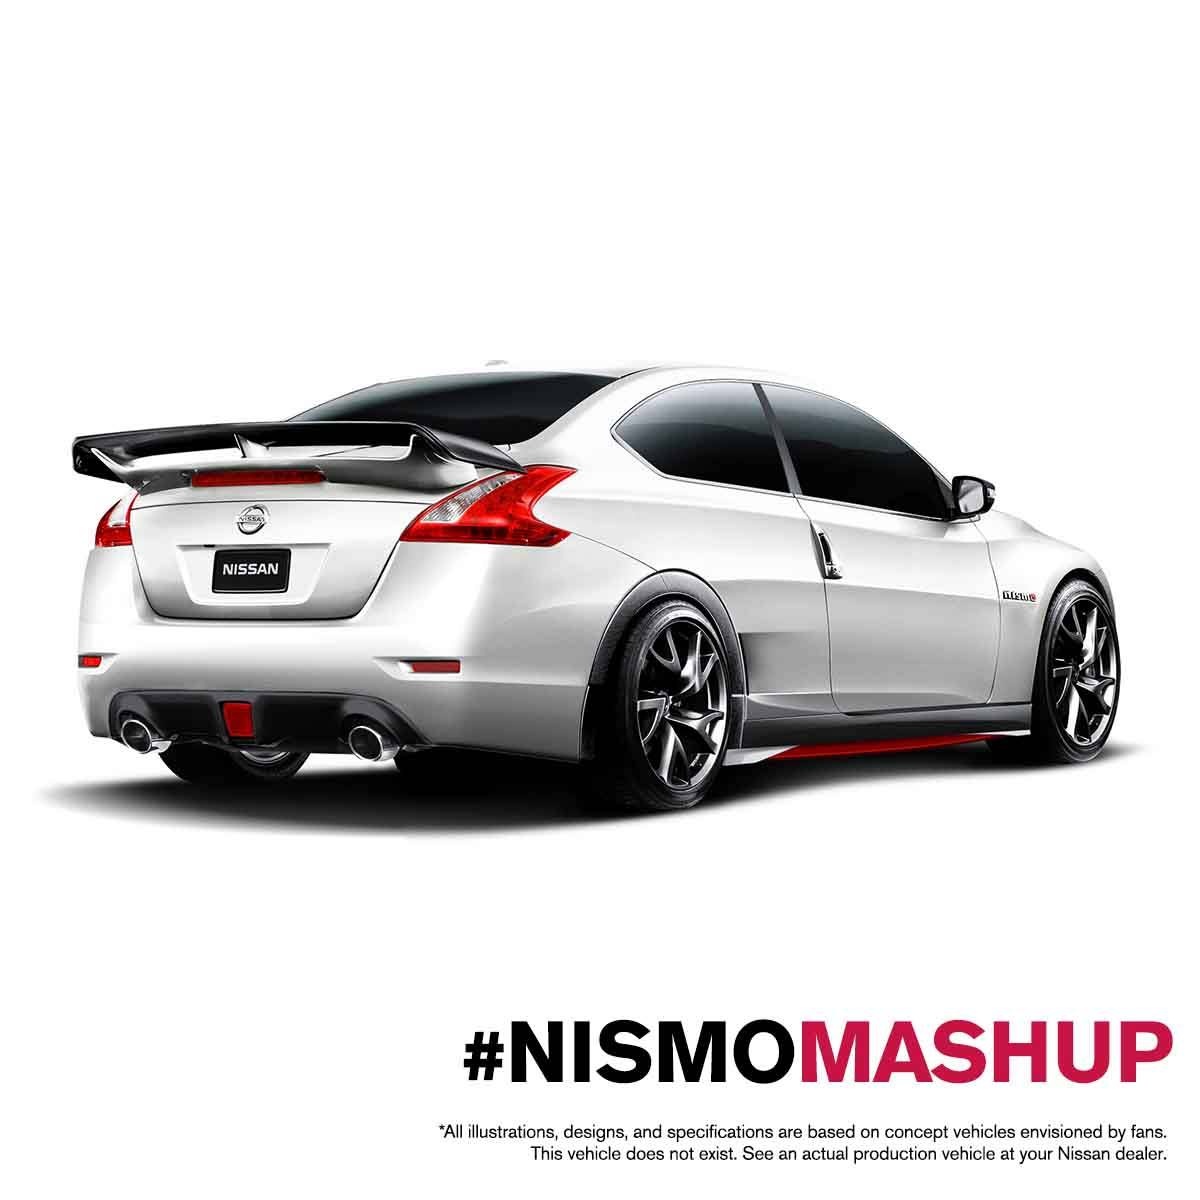 Nissan drawing competition #8